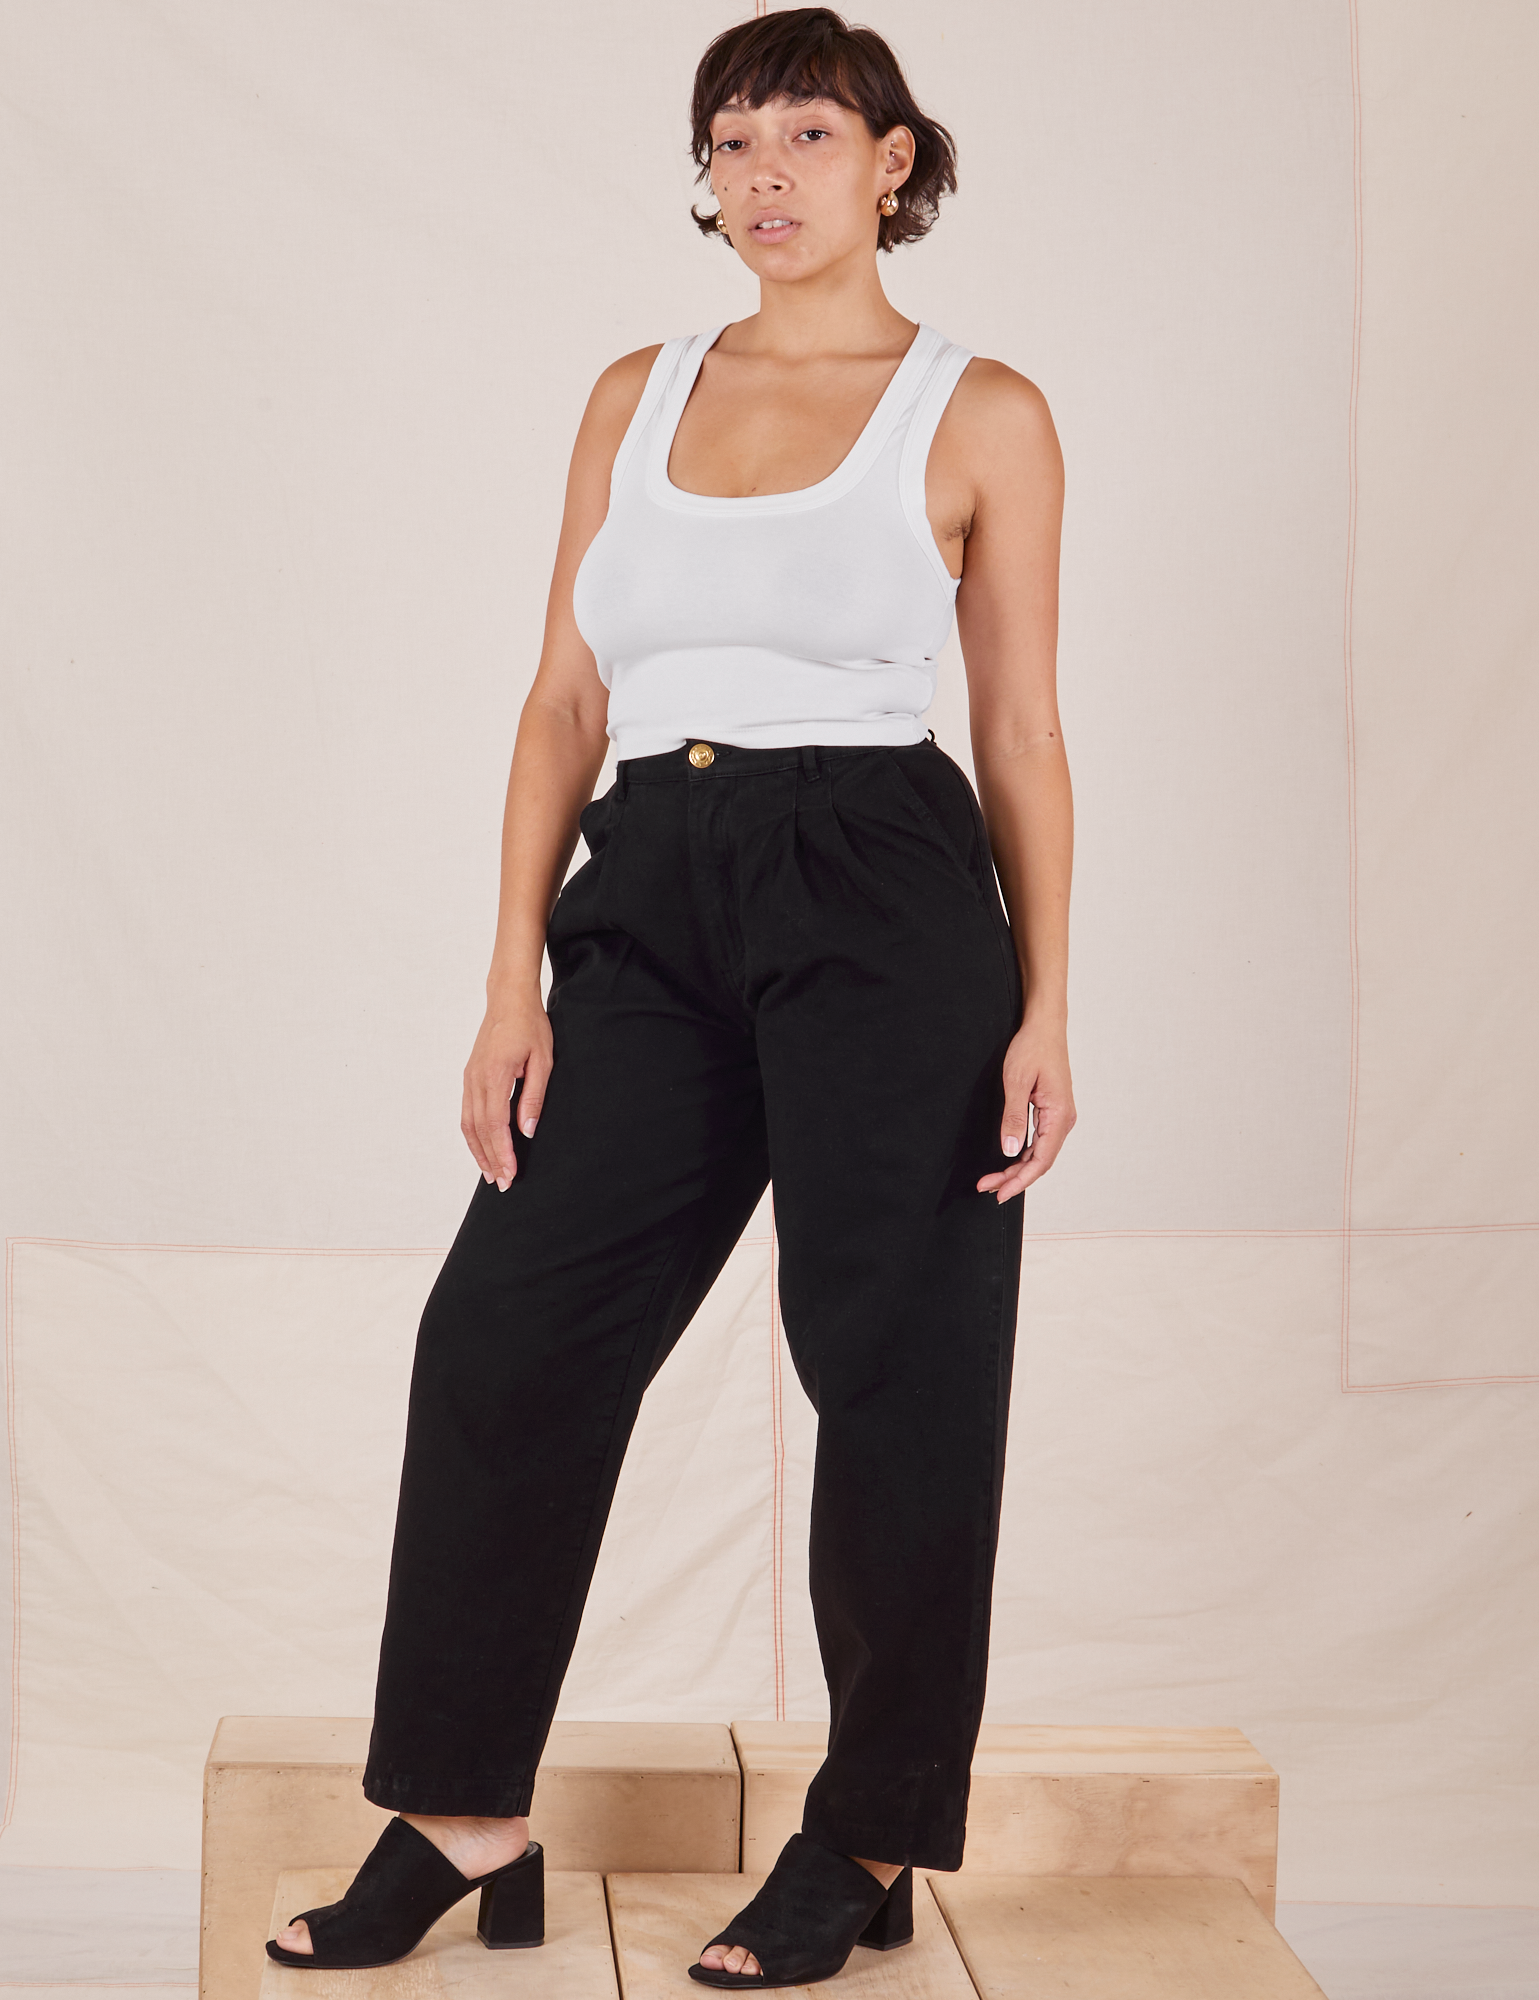 Tiara is 5&#39;4&quot; and wearing S Heavyweight Trousers in Basic Black paired with vintage off-white Cropped Tank Top.